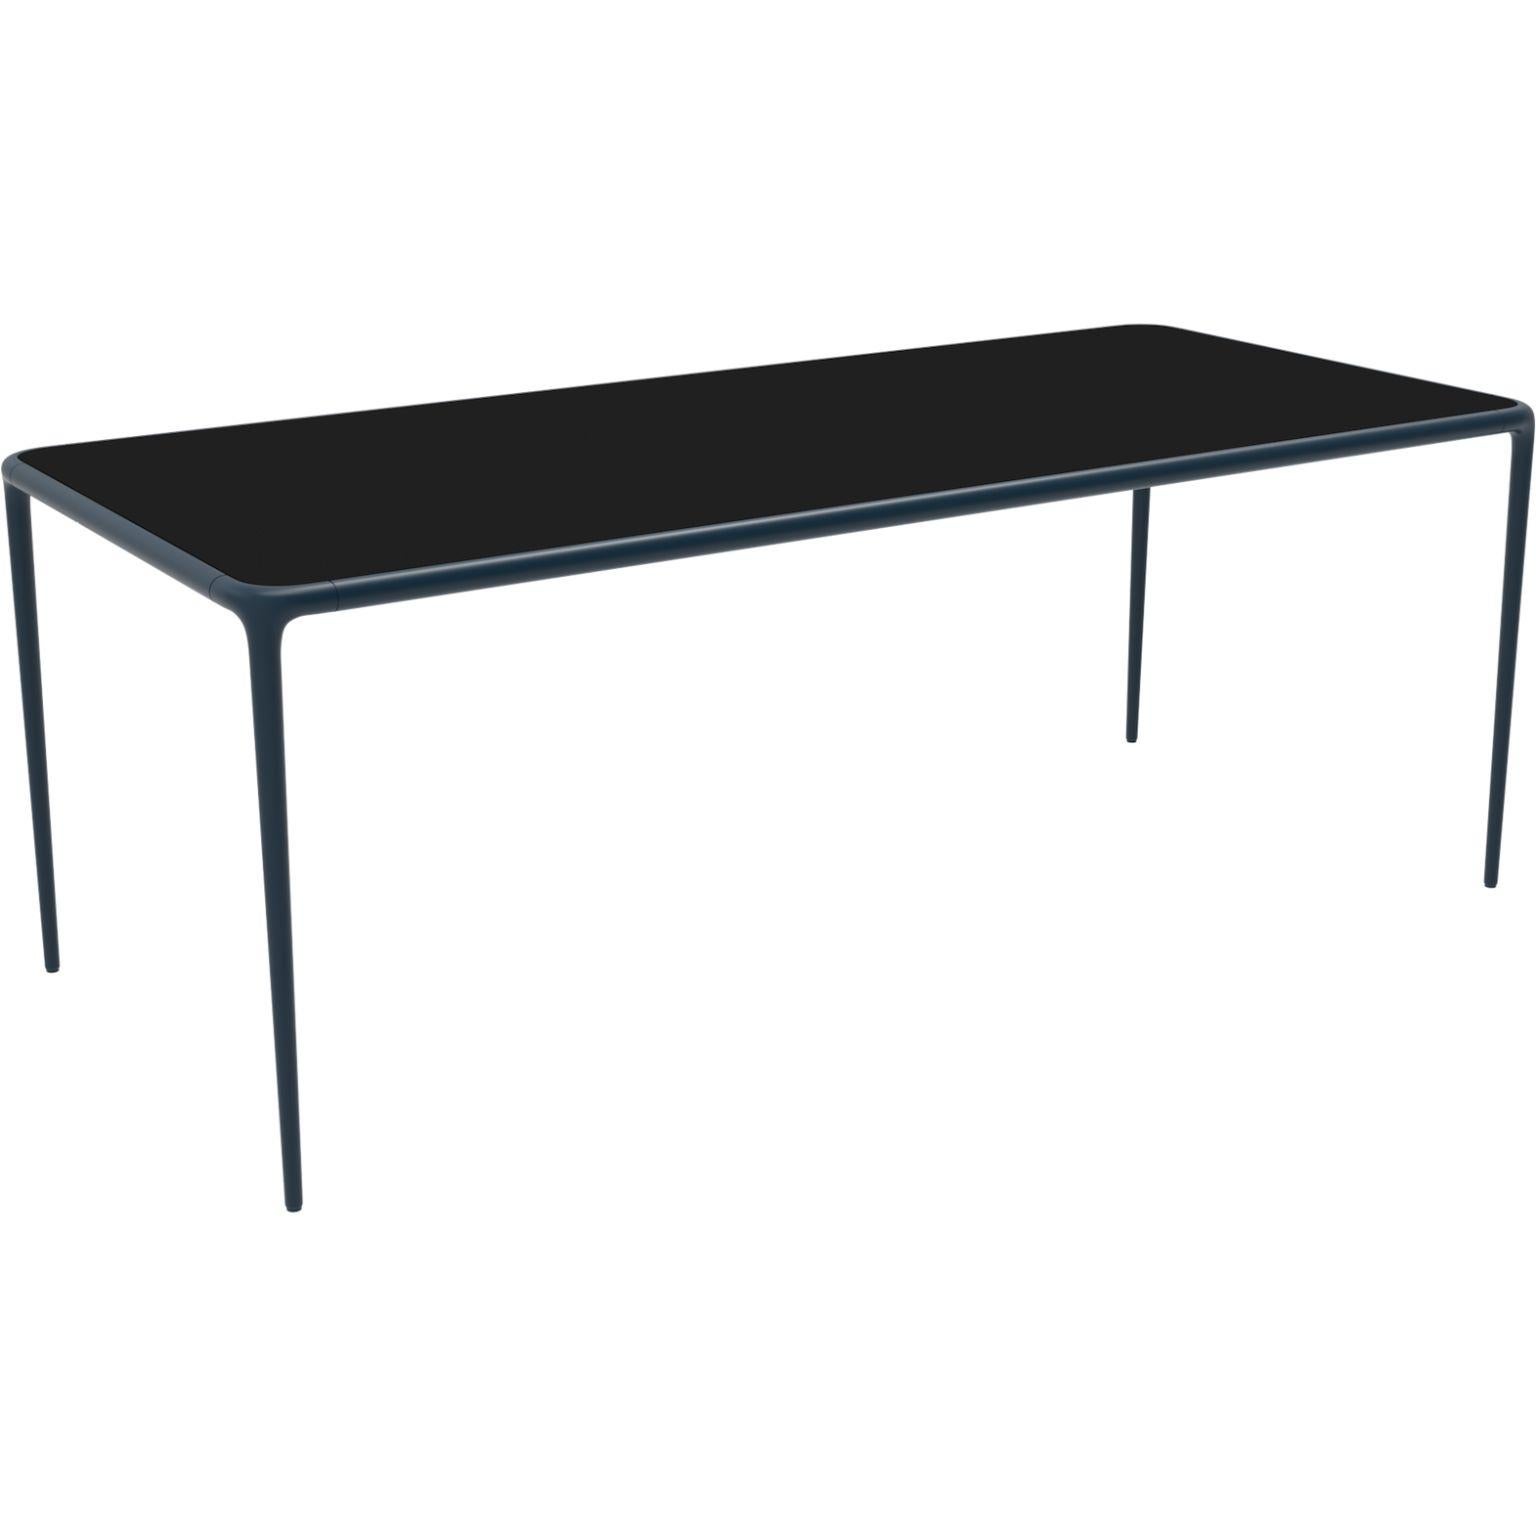 Xaloc navy glass top 200 table by MOWEE
Dimensions: D200 x W90 x H74 cm
Material: Aluminium, tinted tempered glass top.
Also available in different aluminum colors and finishes (HPL Black Edge or Neolith). 

Xaloc synthesizes the lines of